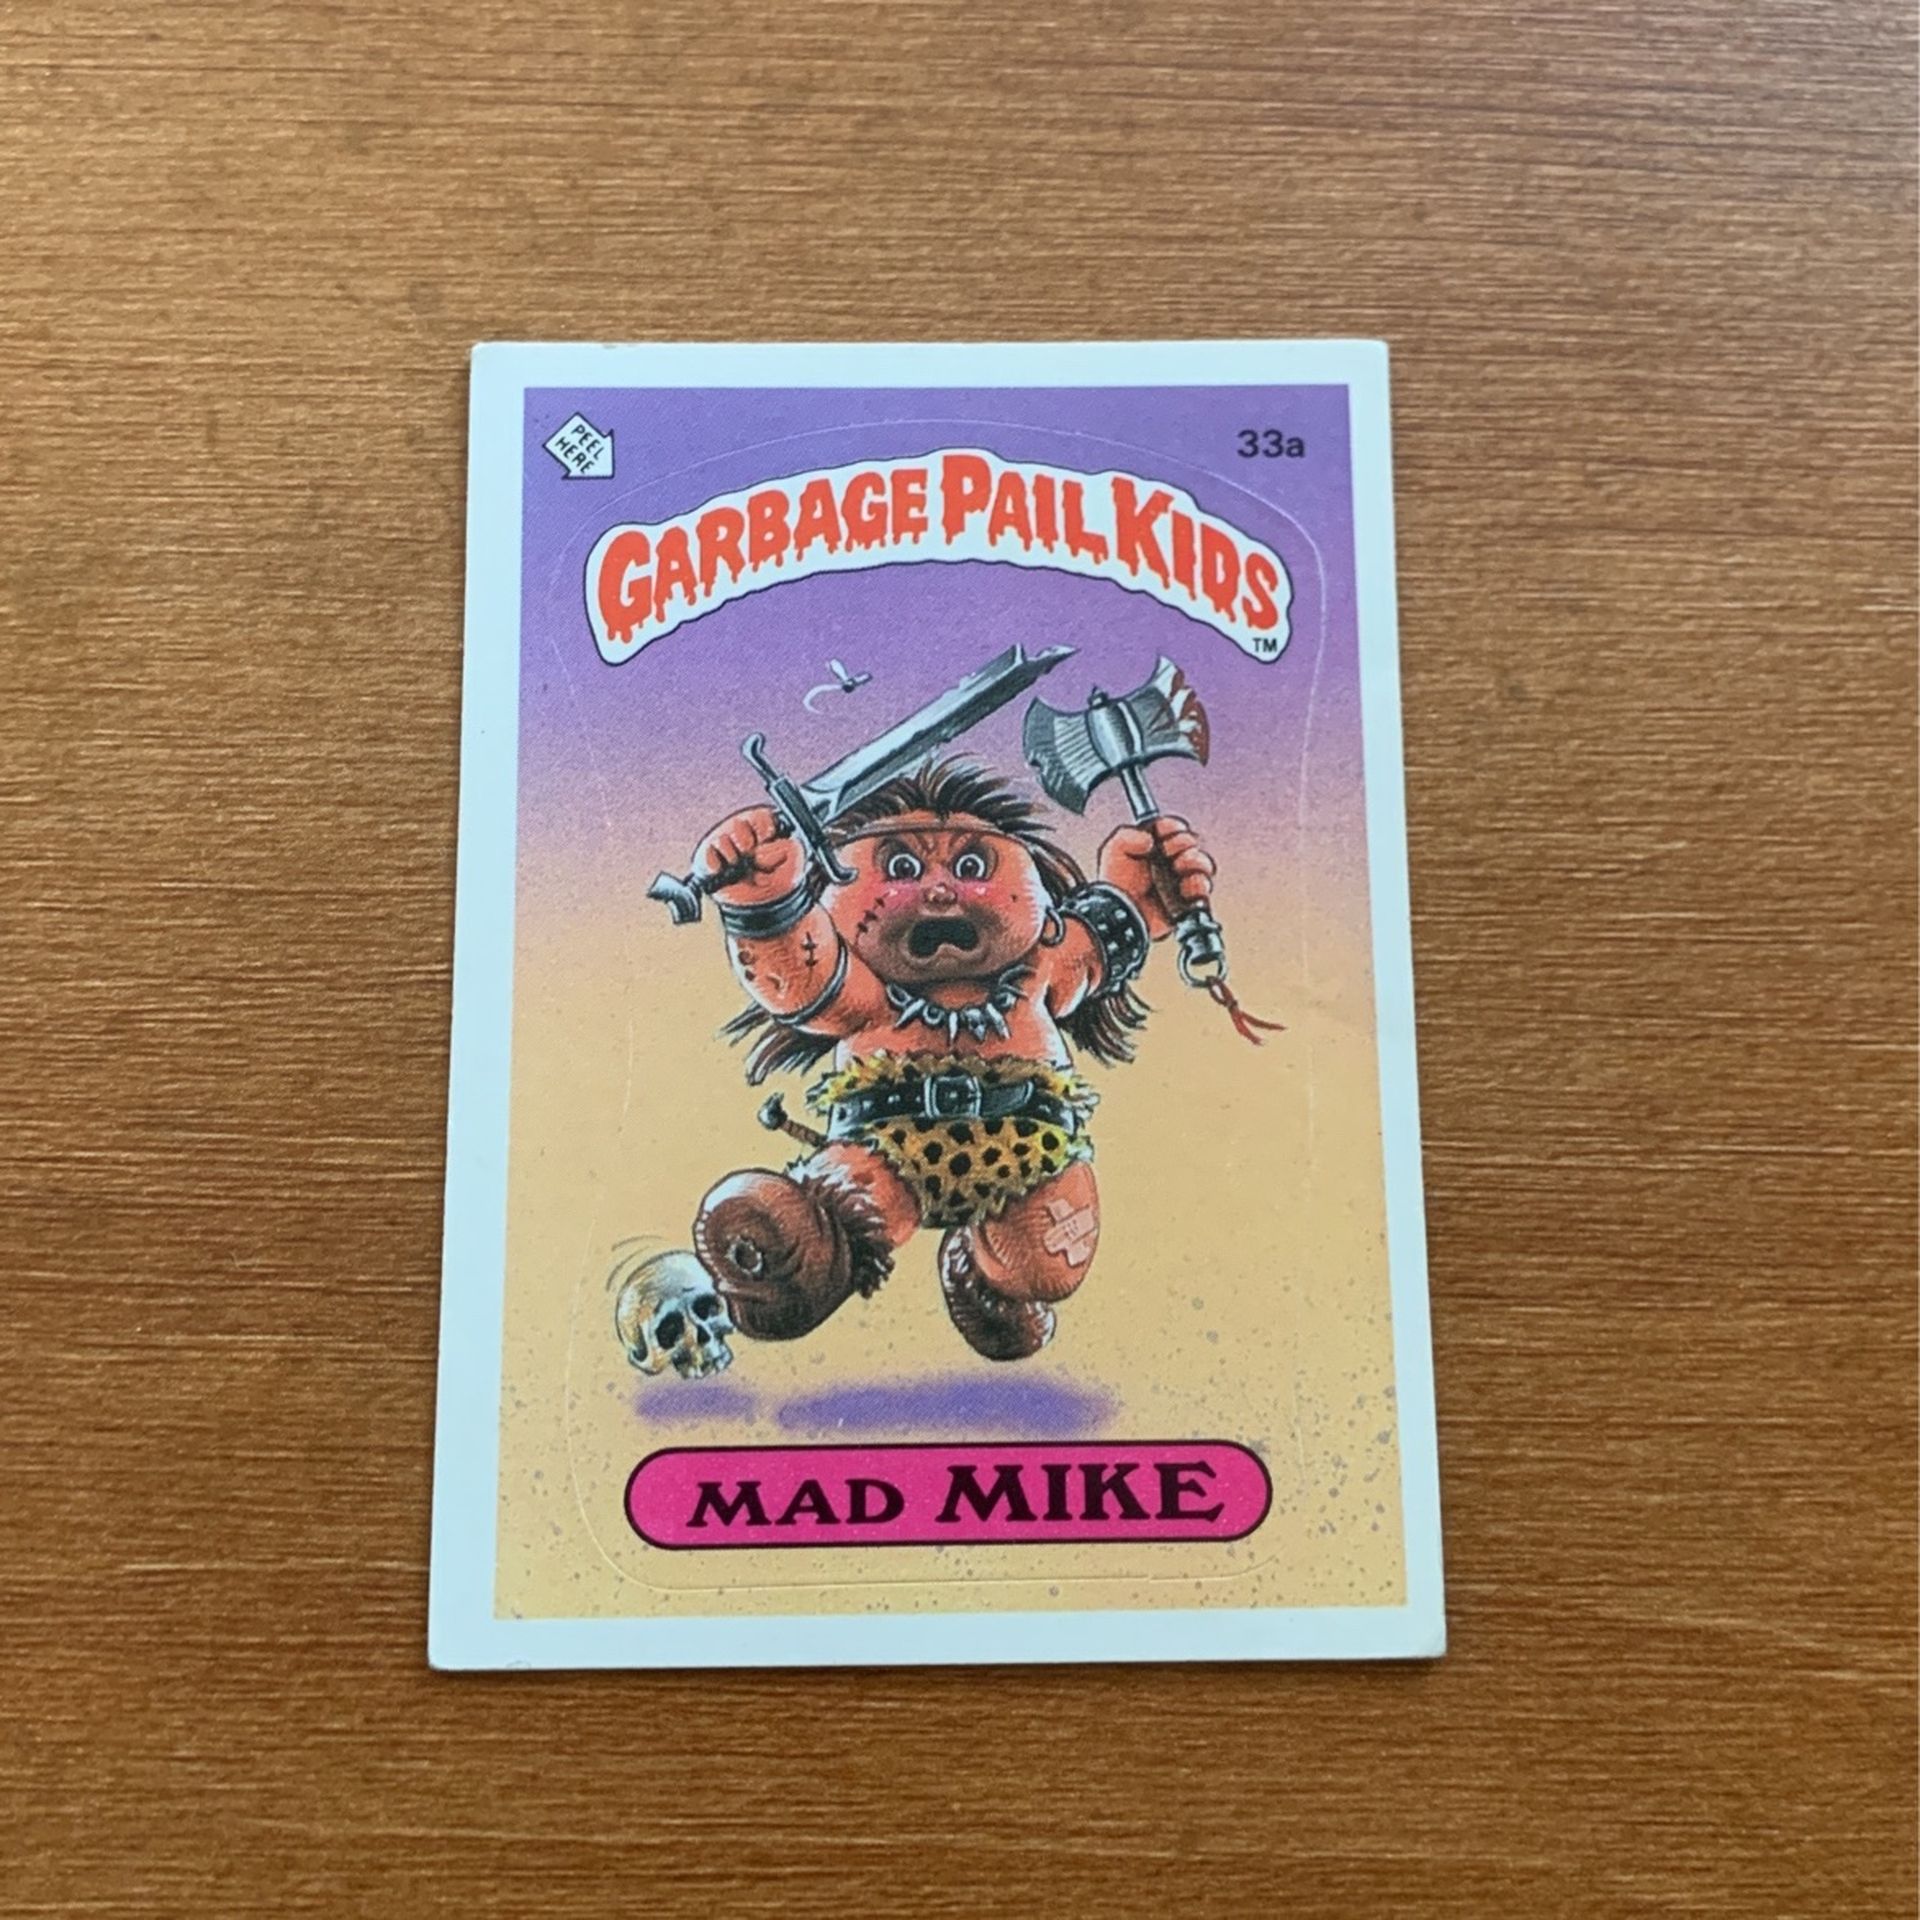 Garbage Pail Kids - Series 1 Mad Mike 33a